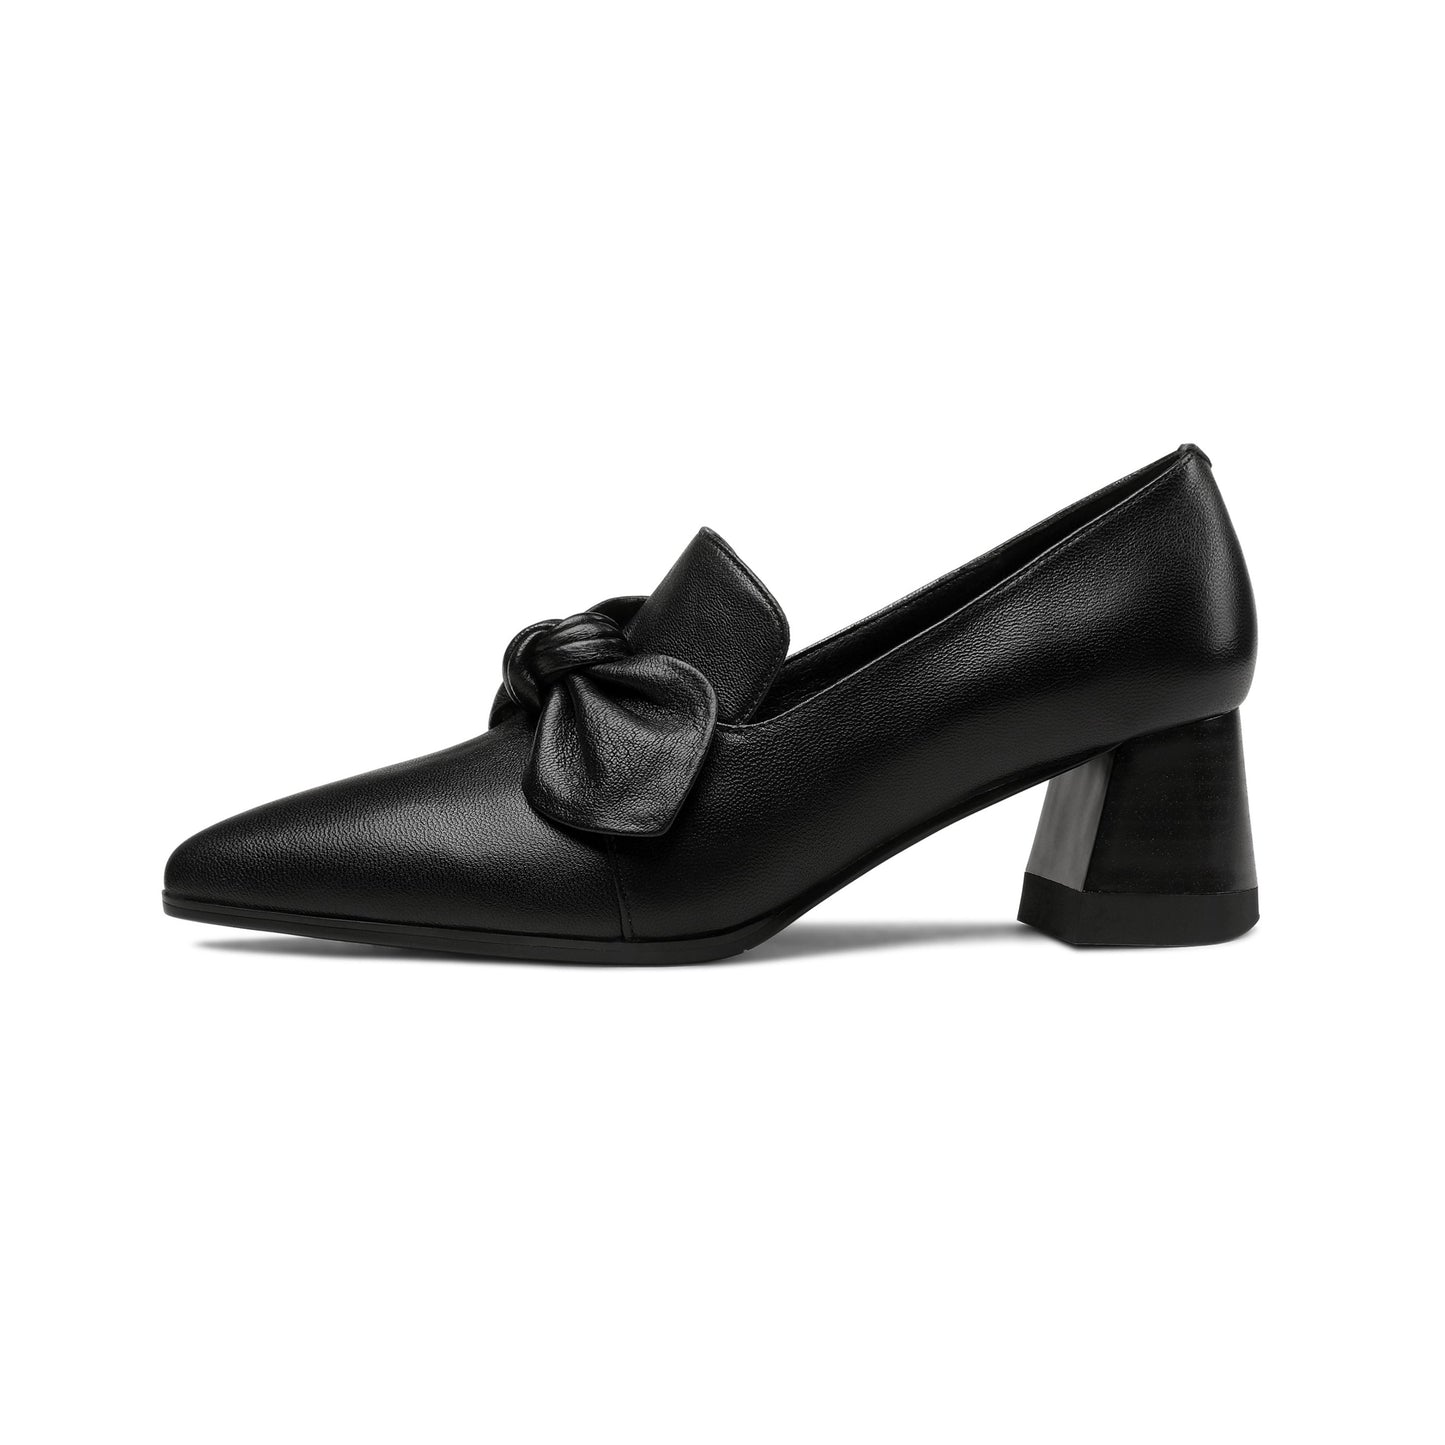 TinaCus Handmade Women's Genuine Leather Bowknot Slip On Pointed Toe Mid Chunky Heel Pumps Shoes